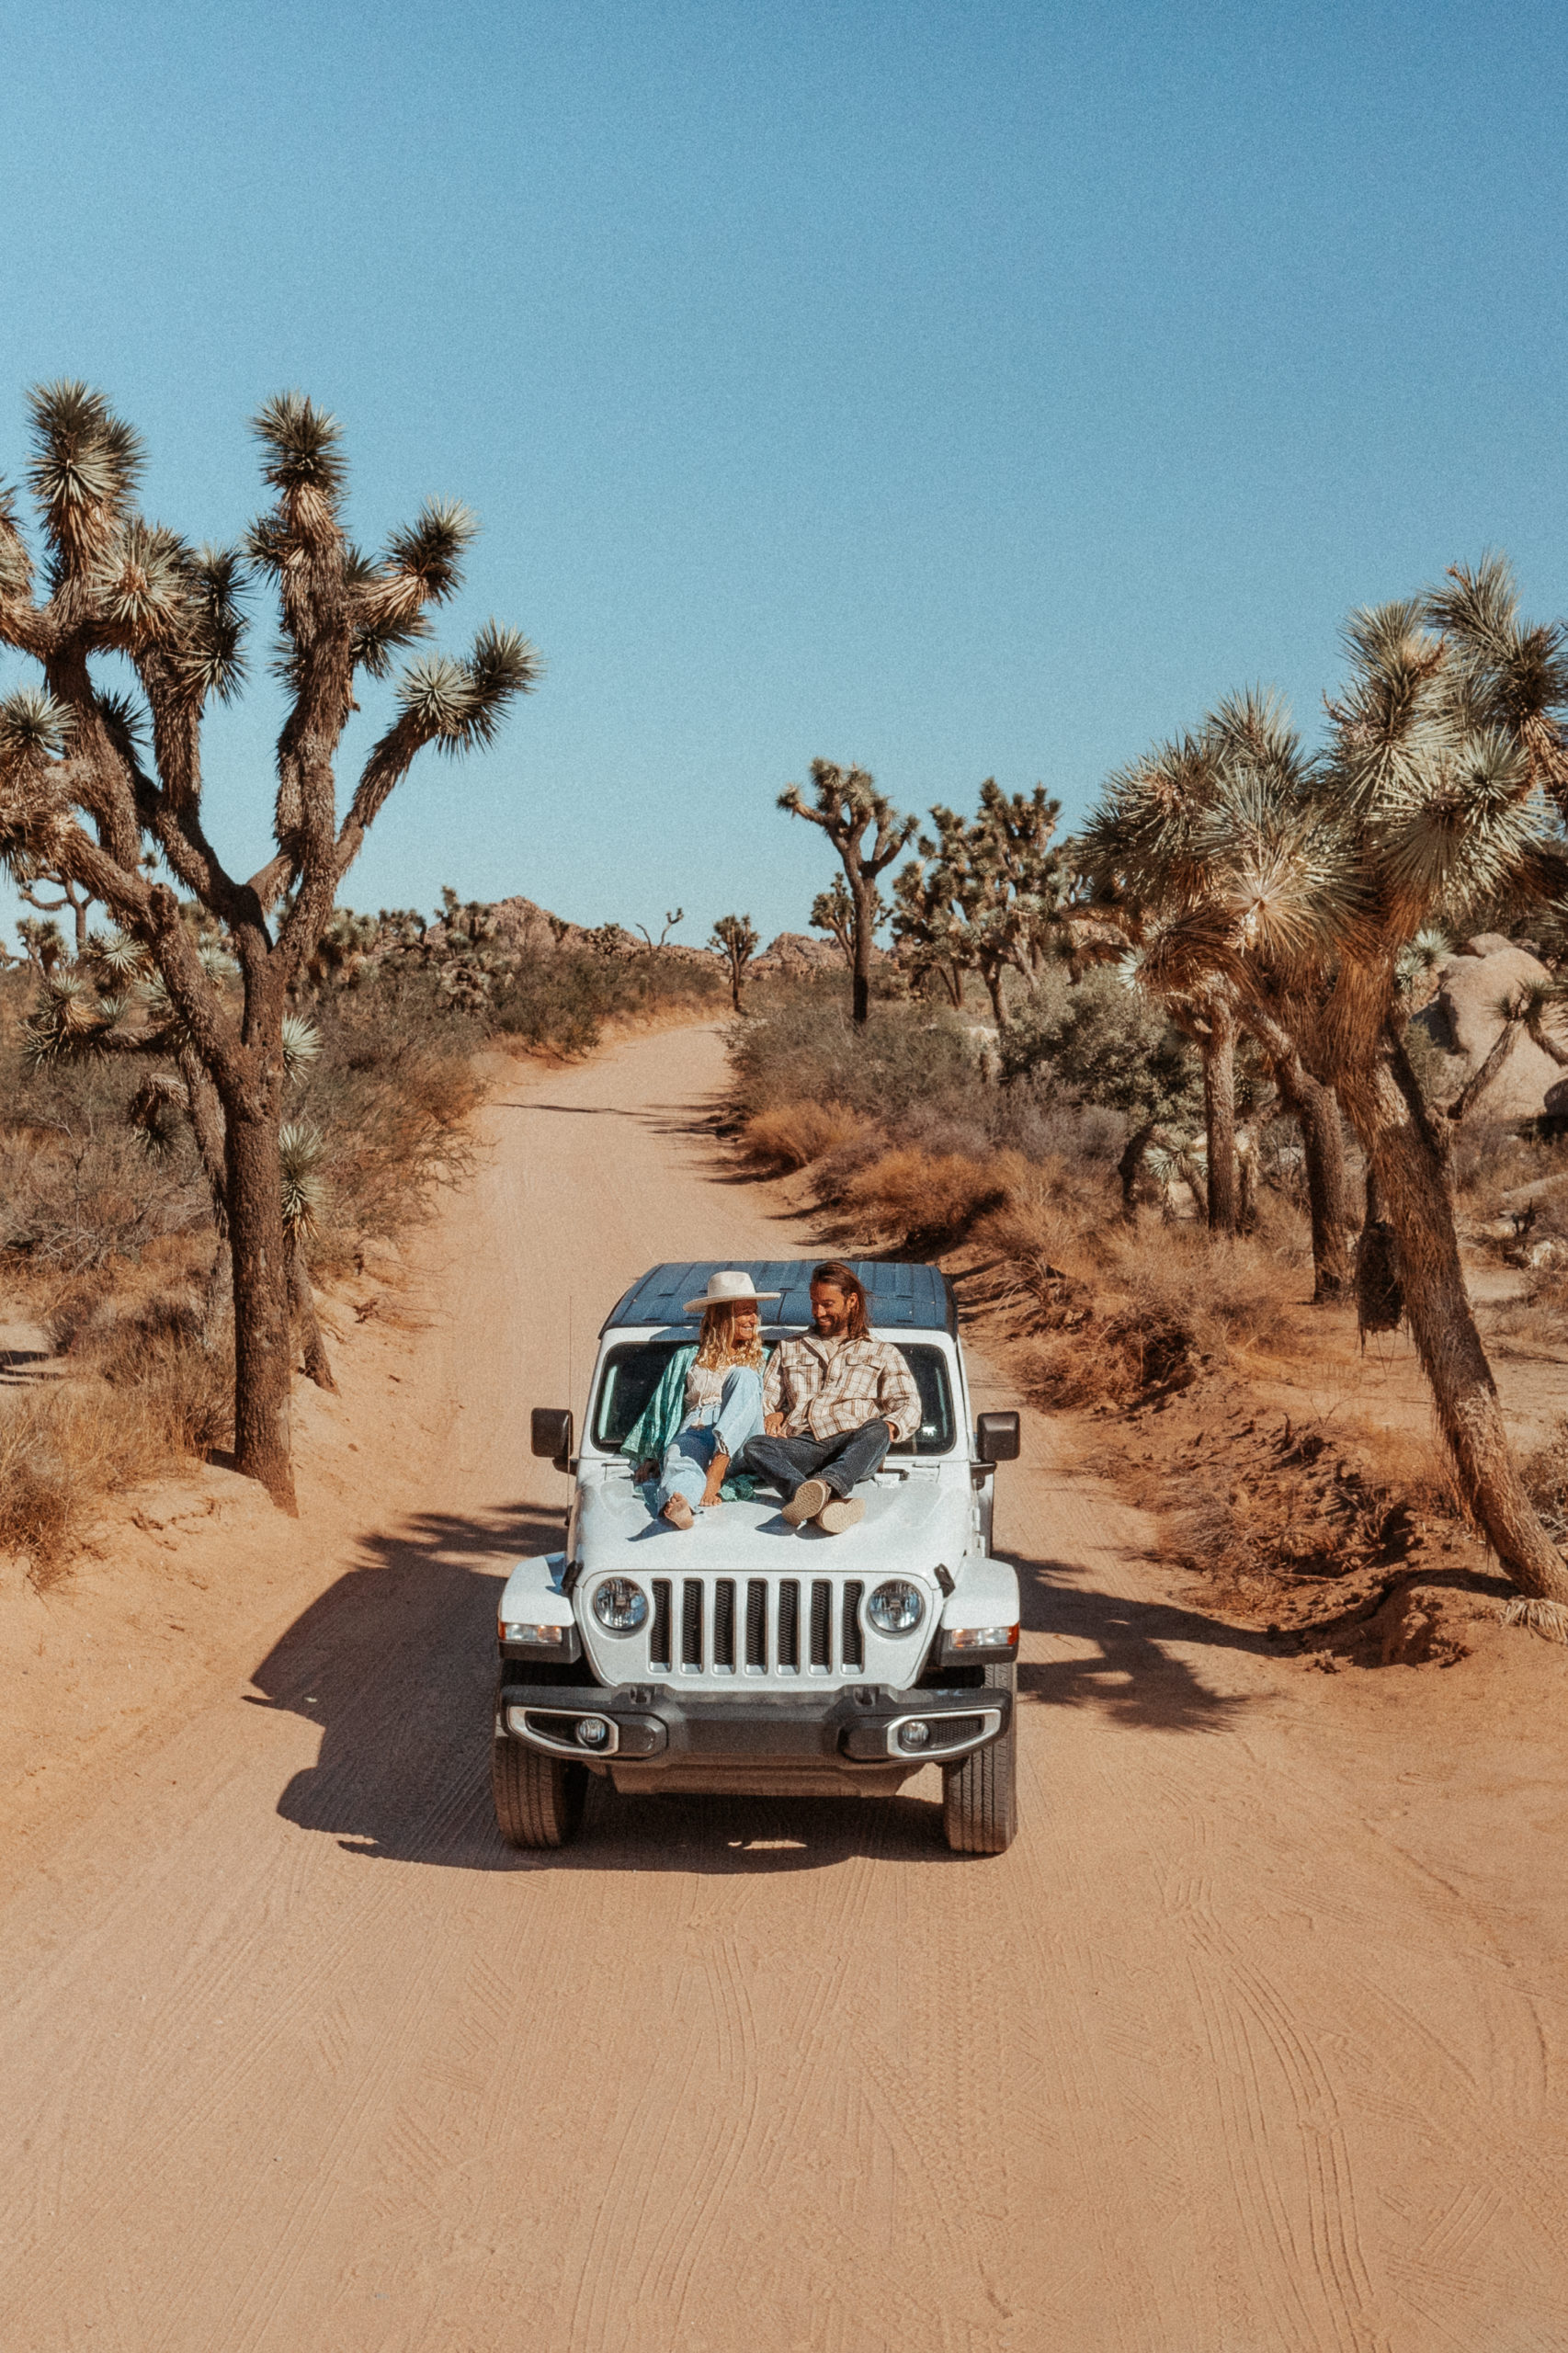 Sarah and Chesh on the front of a white Jeep, in Joshua Tree National Park